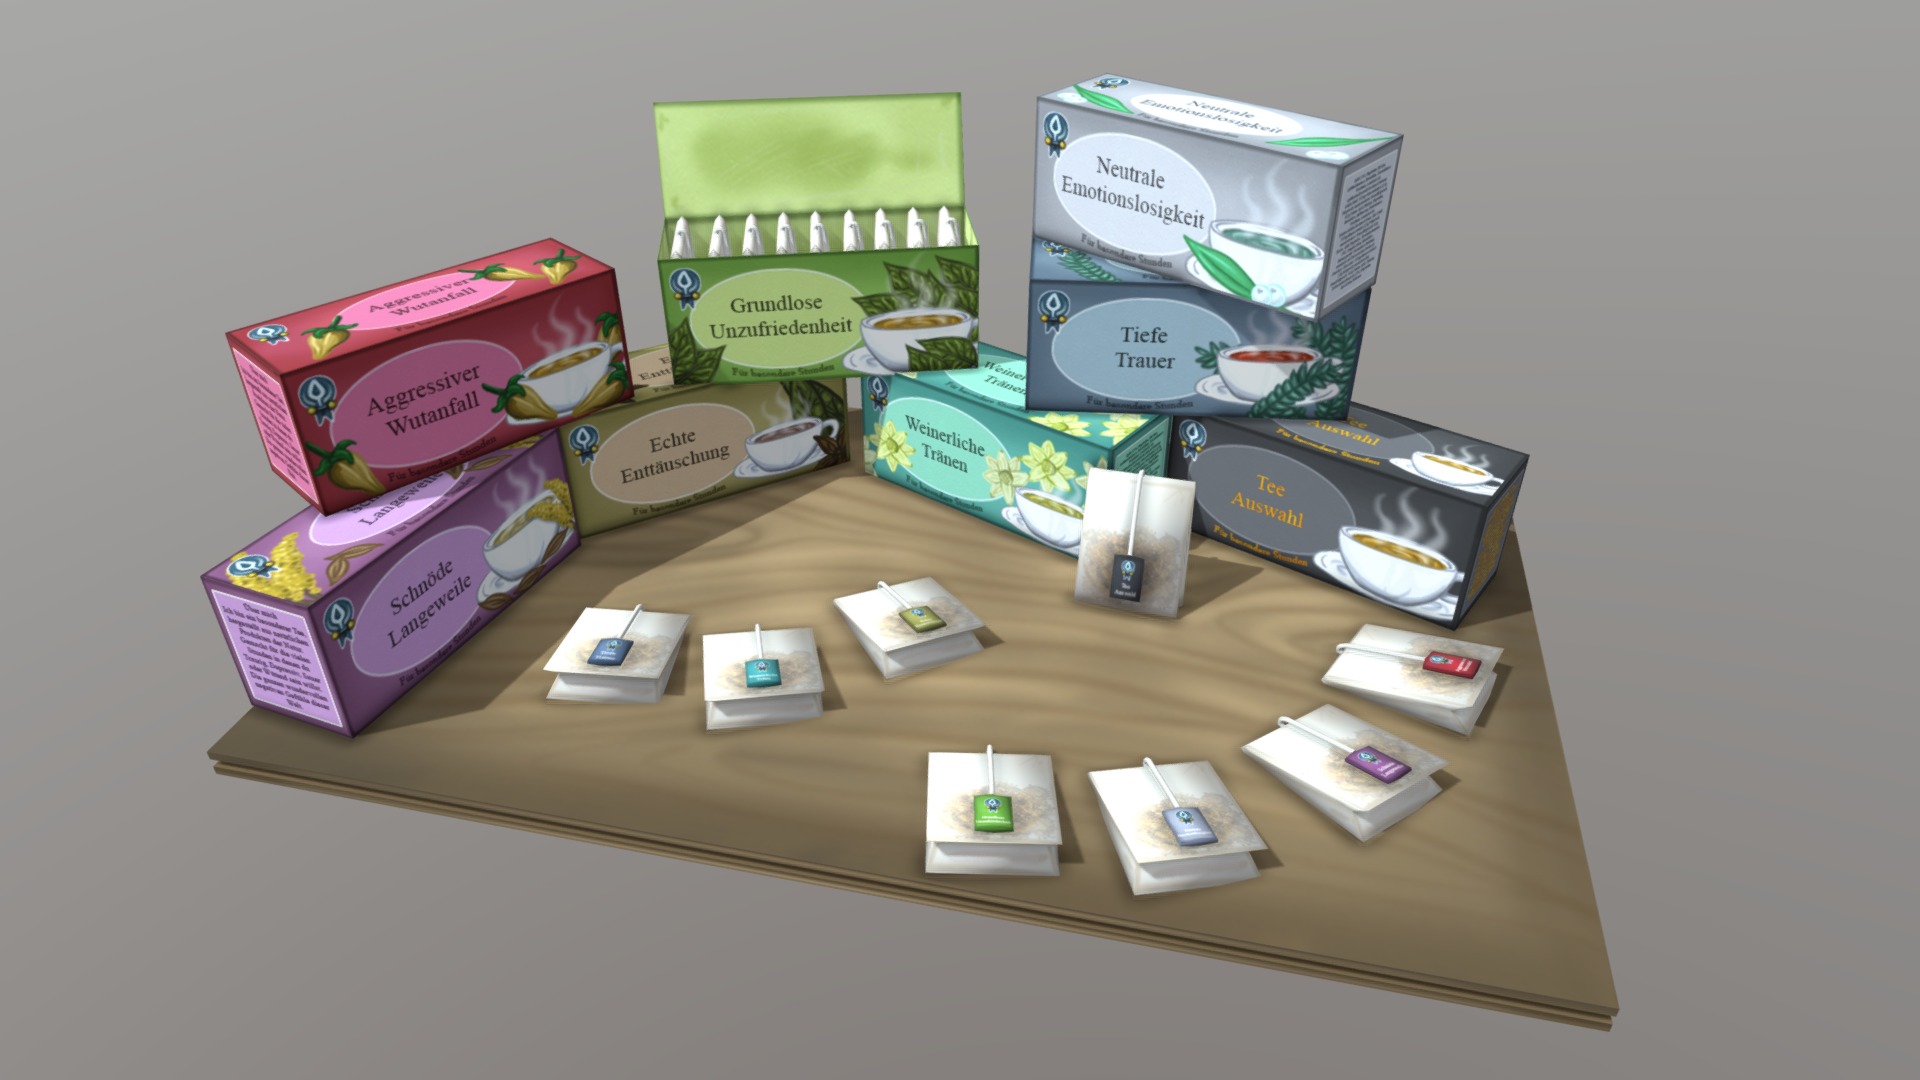 3D model Deutscher Genuss Tee –  Some necessary tea - This is a 3D model of the Deutscher Genuss Tee -  Some necessary tea. The 3D model is about a table with boxes and electronics on it.